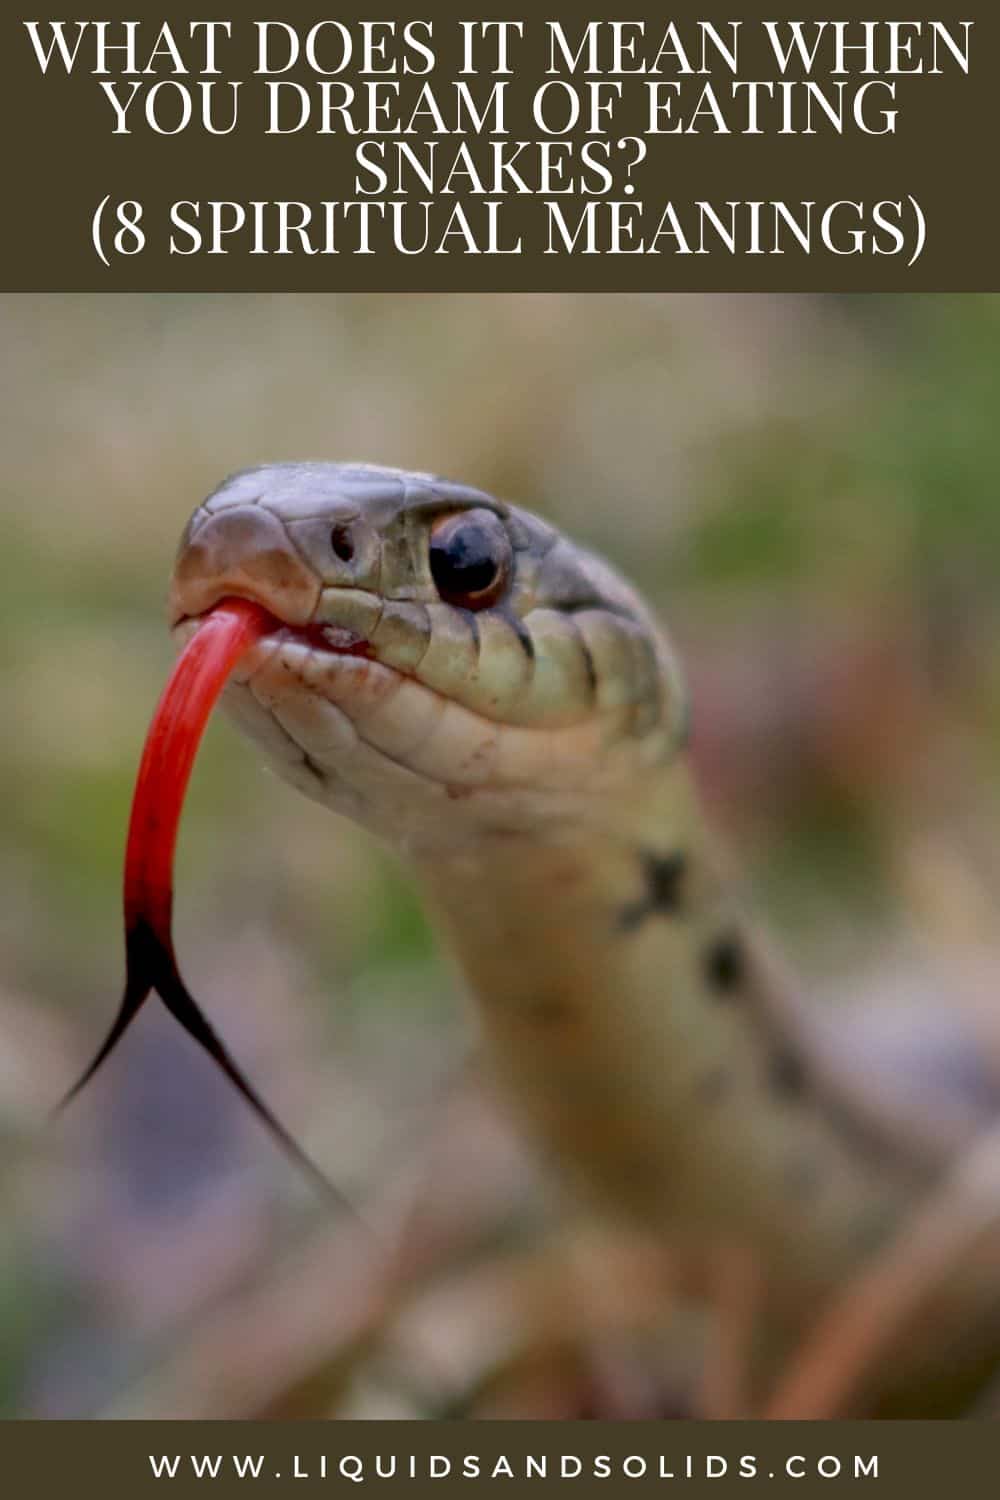 What Does It Mean When You Dream Of Eating Snakes? (8 Spiritual Meanings)